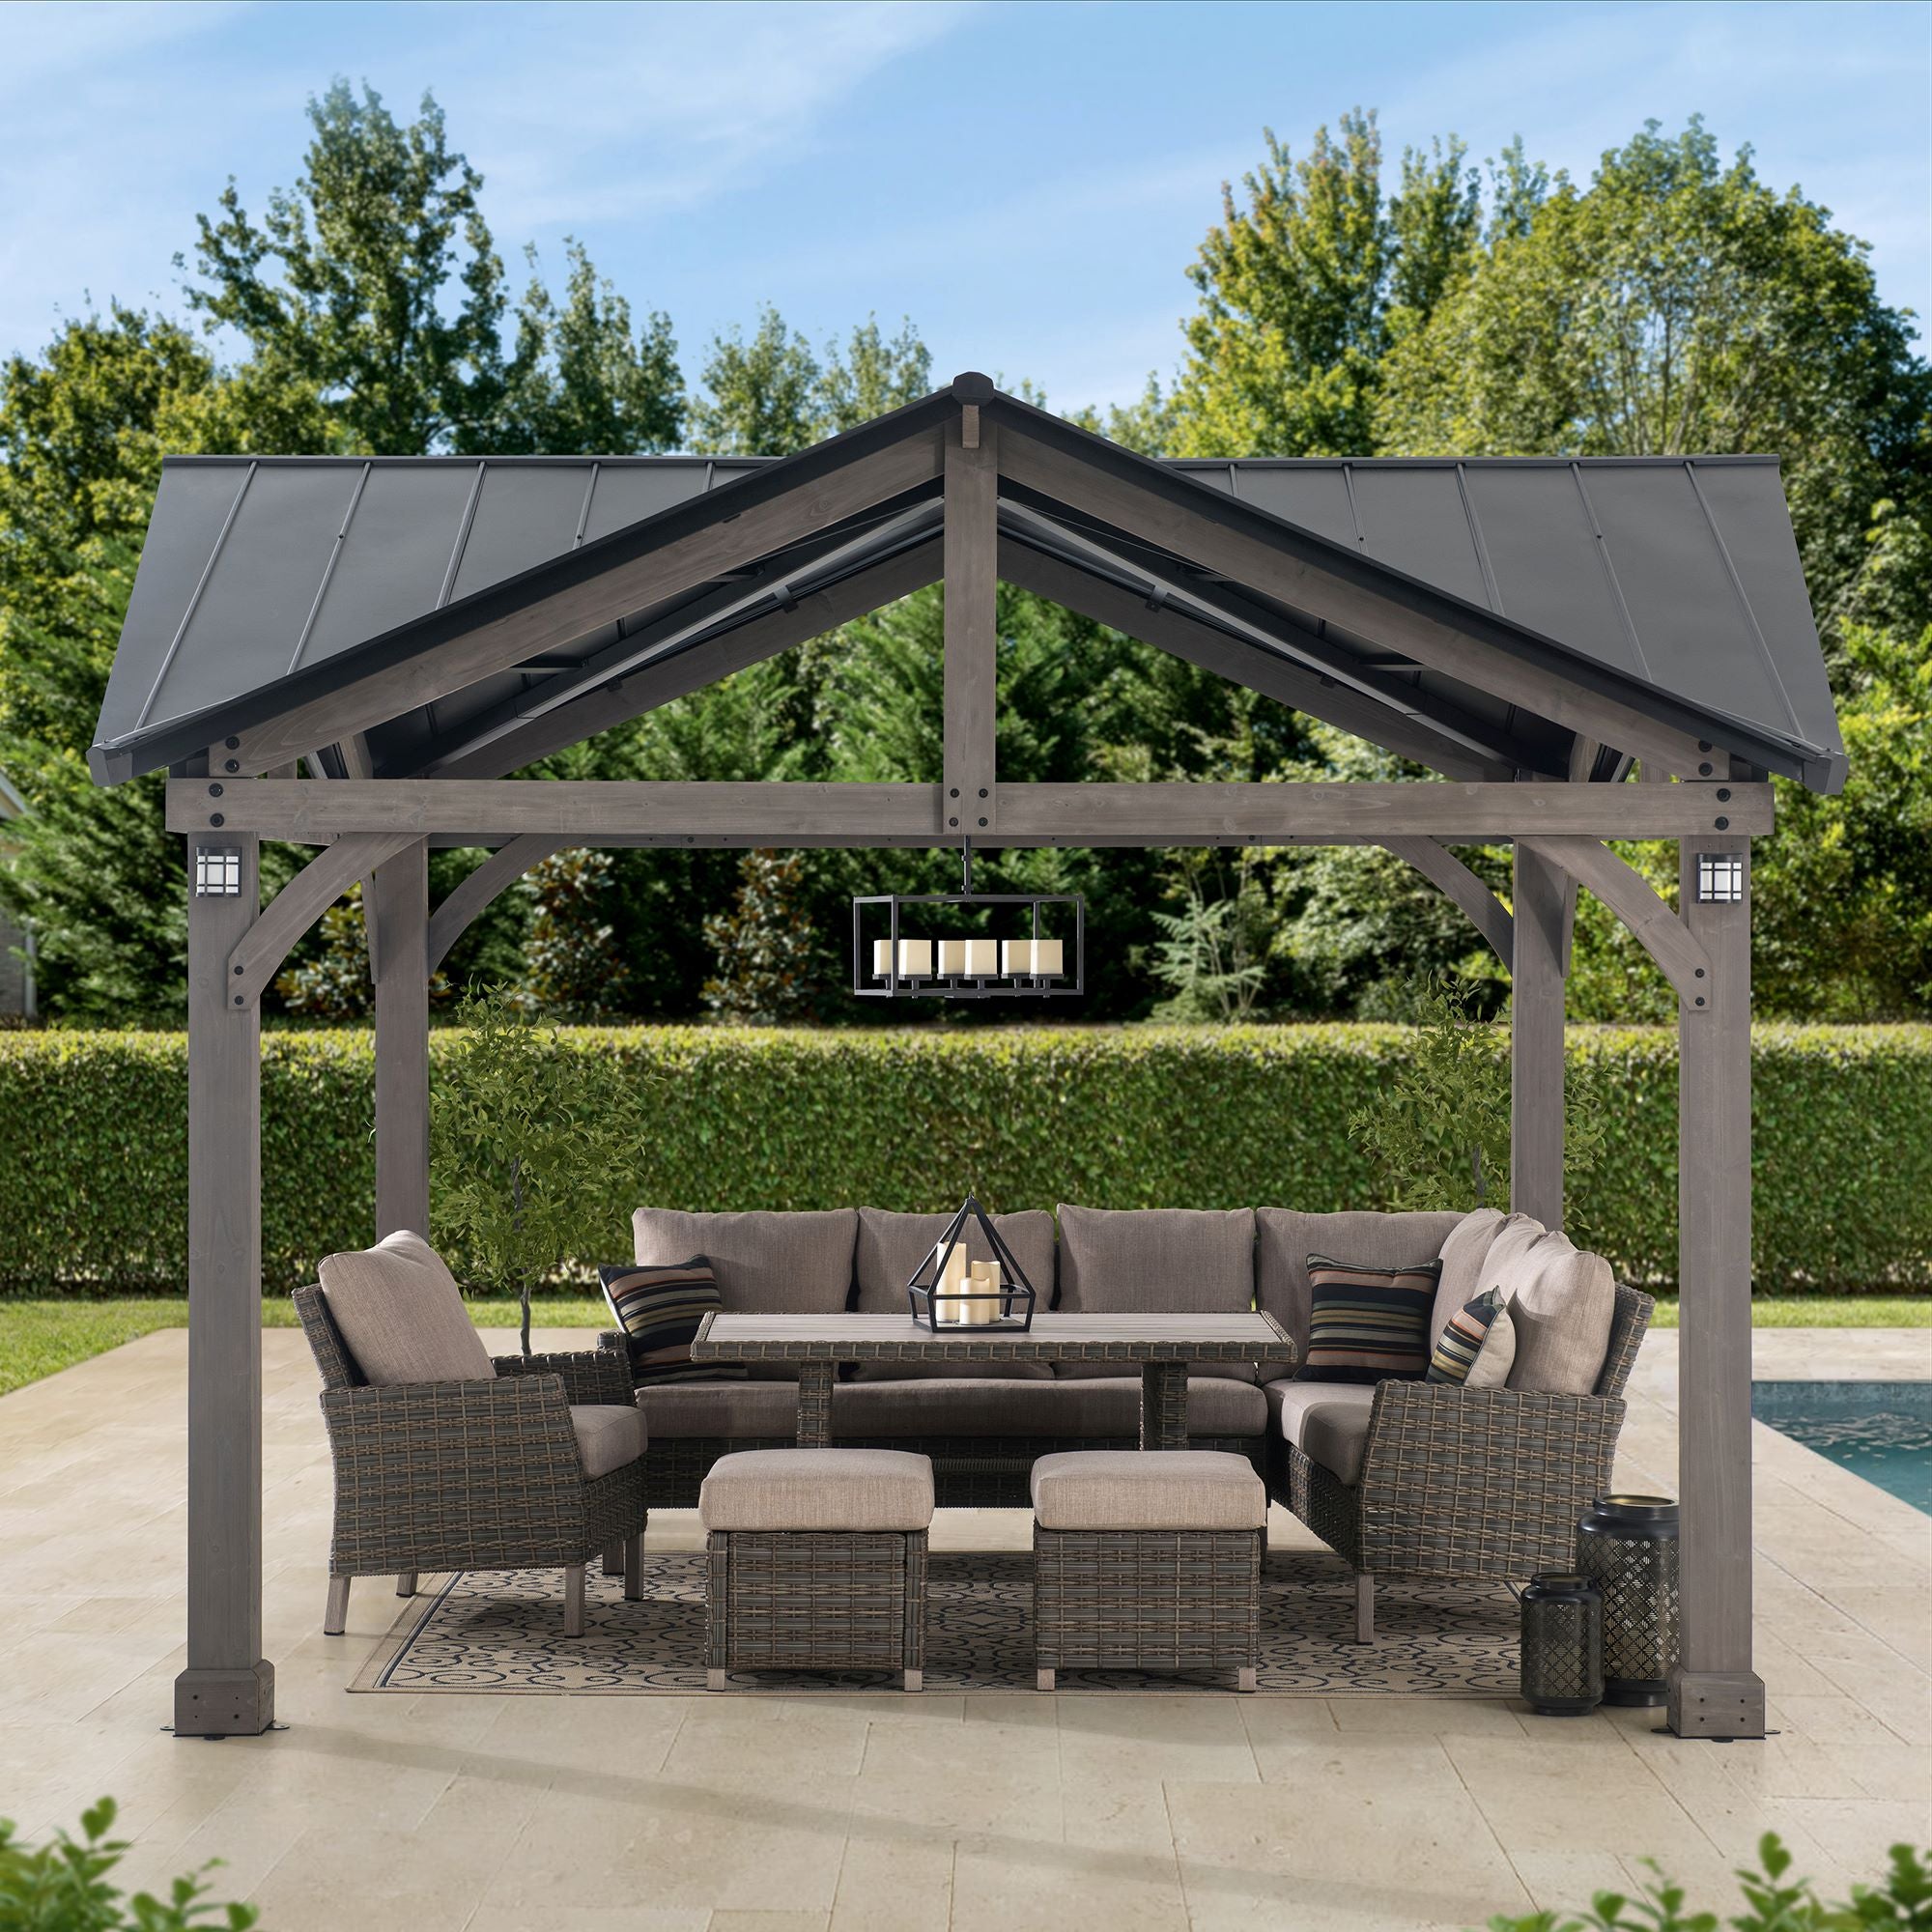 Sunjoy 13.5x13.5 Steel Hardtop Gazebo with Solar Powered LED Lights and Built-in Power System